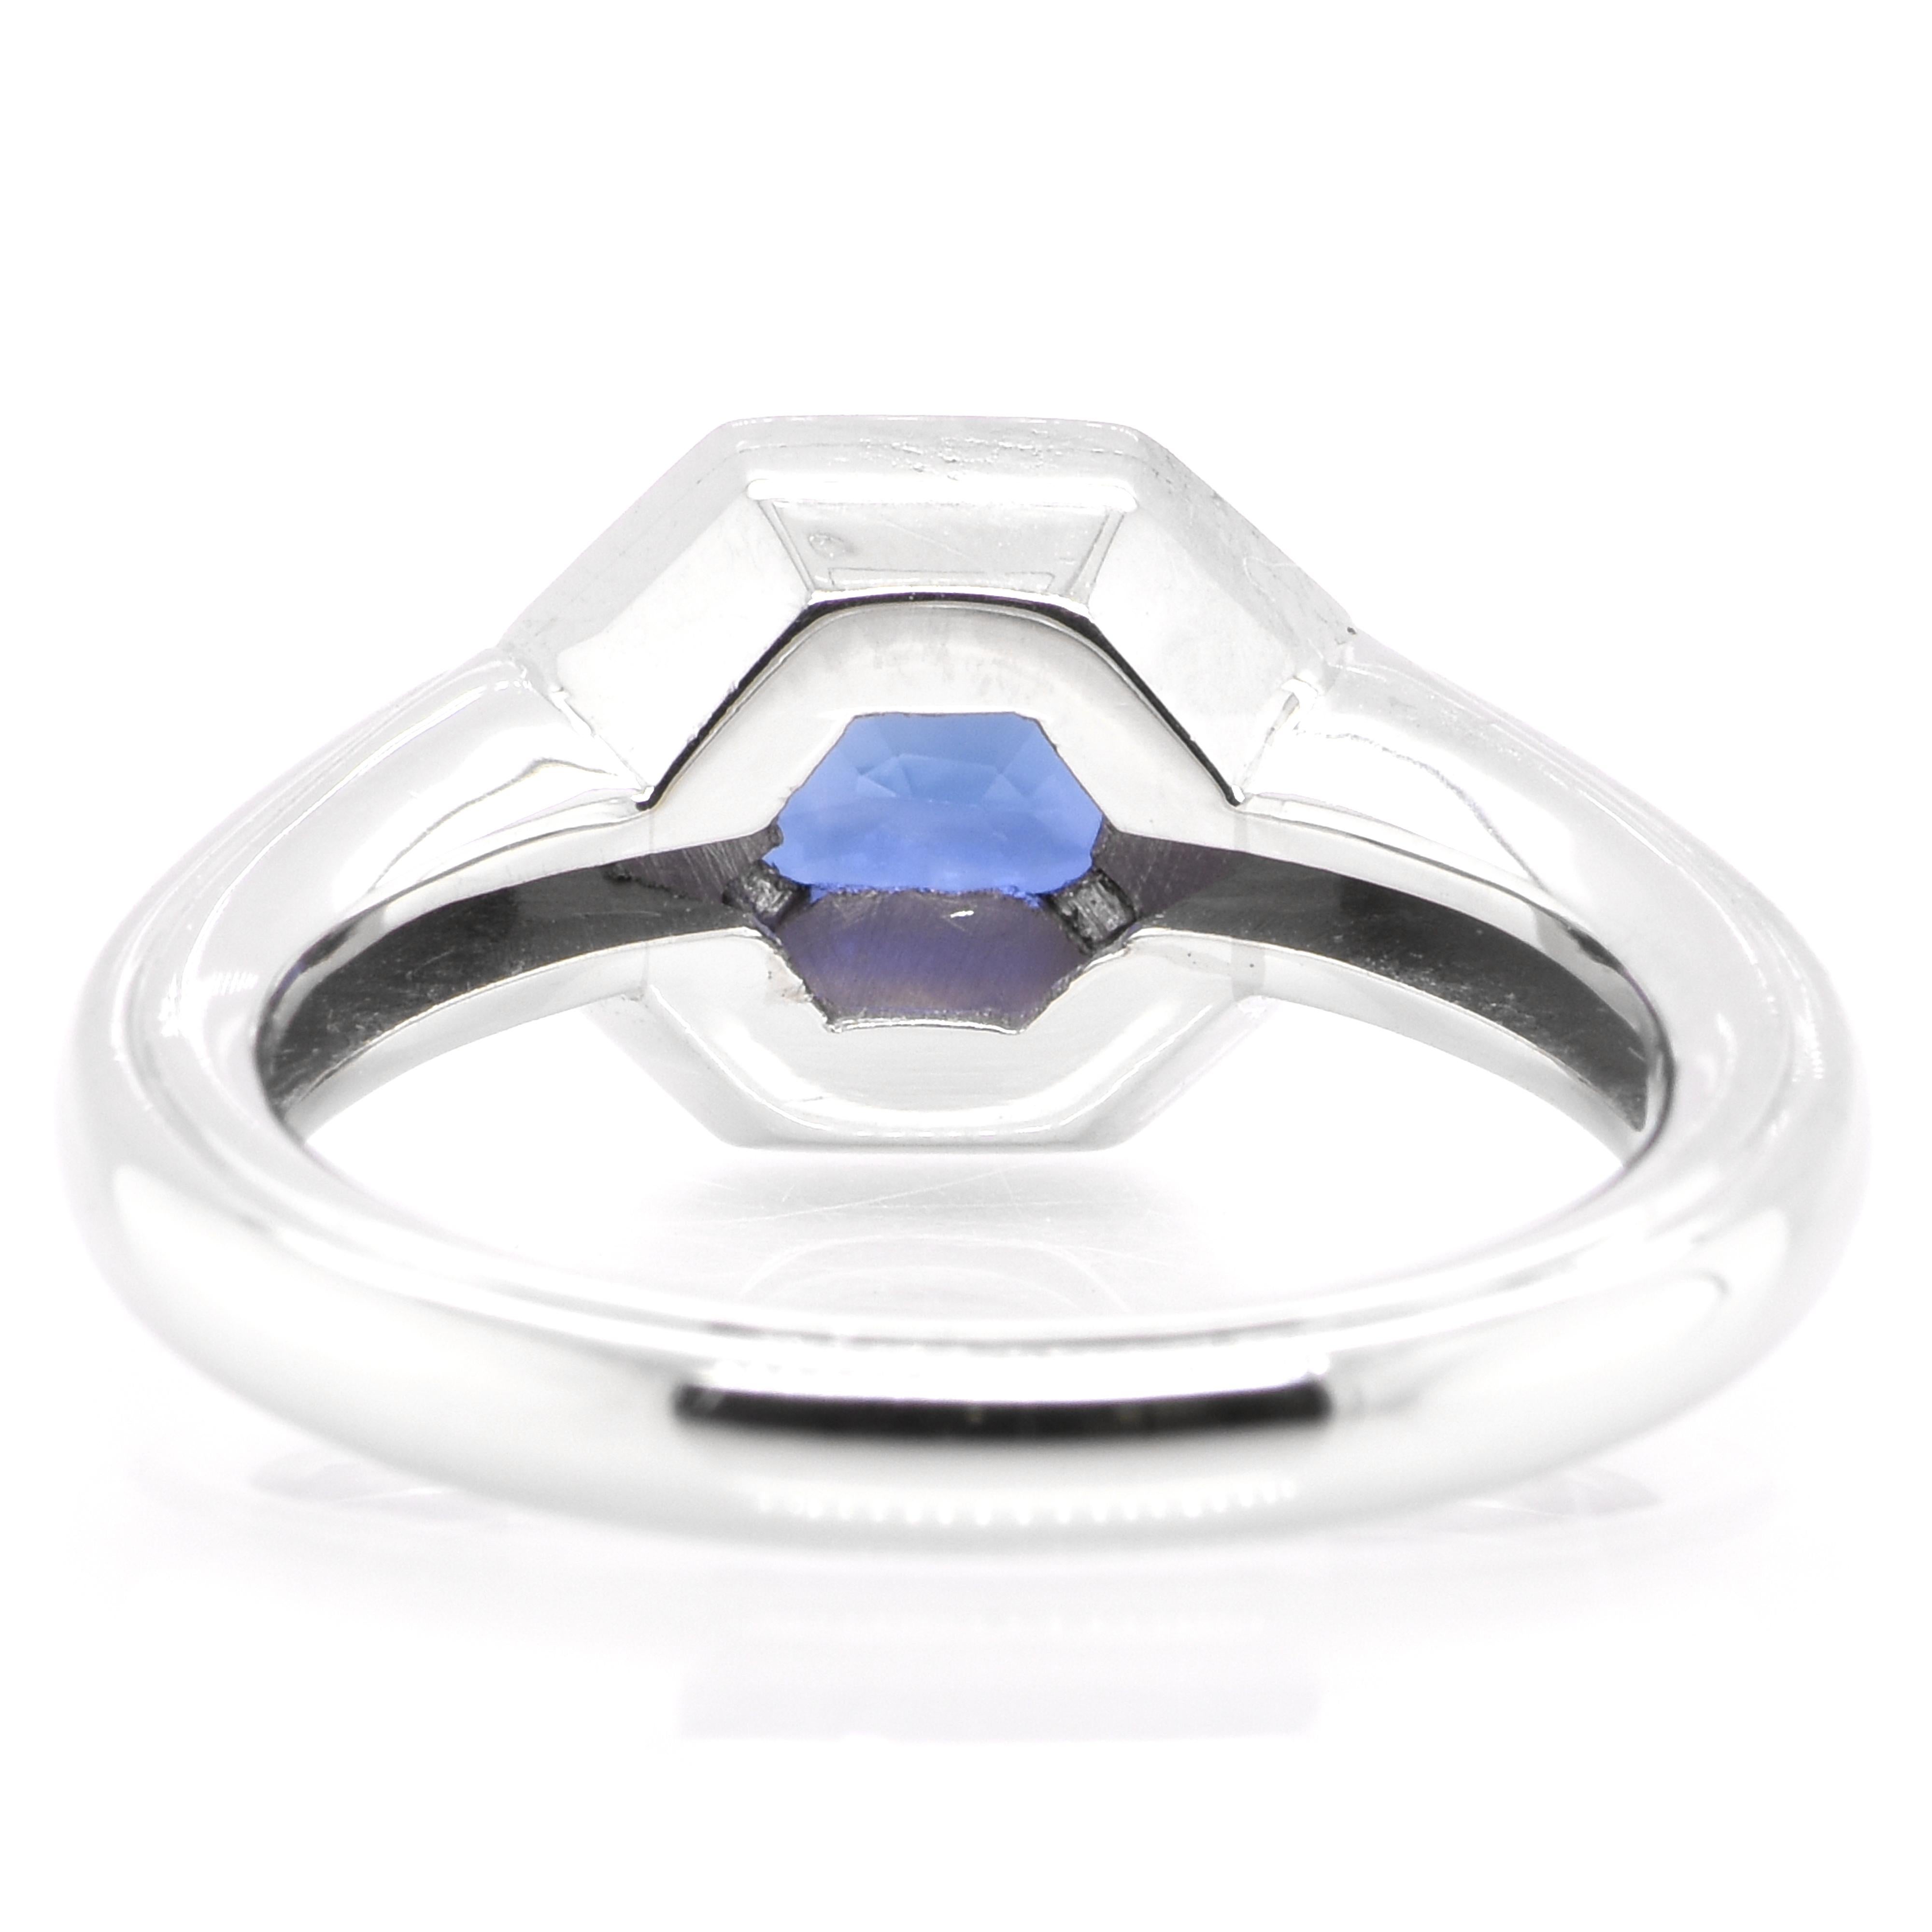 Women's 1.20 Carat Natural Sapphire and Diamond Ring Set in Platinum For Sale